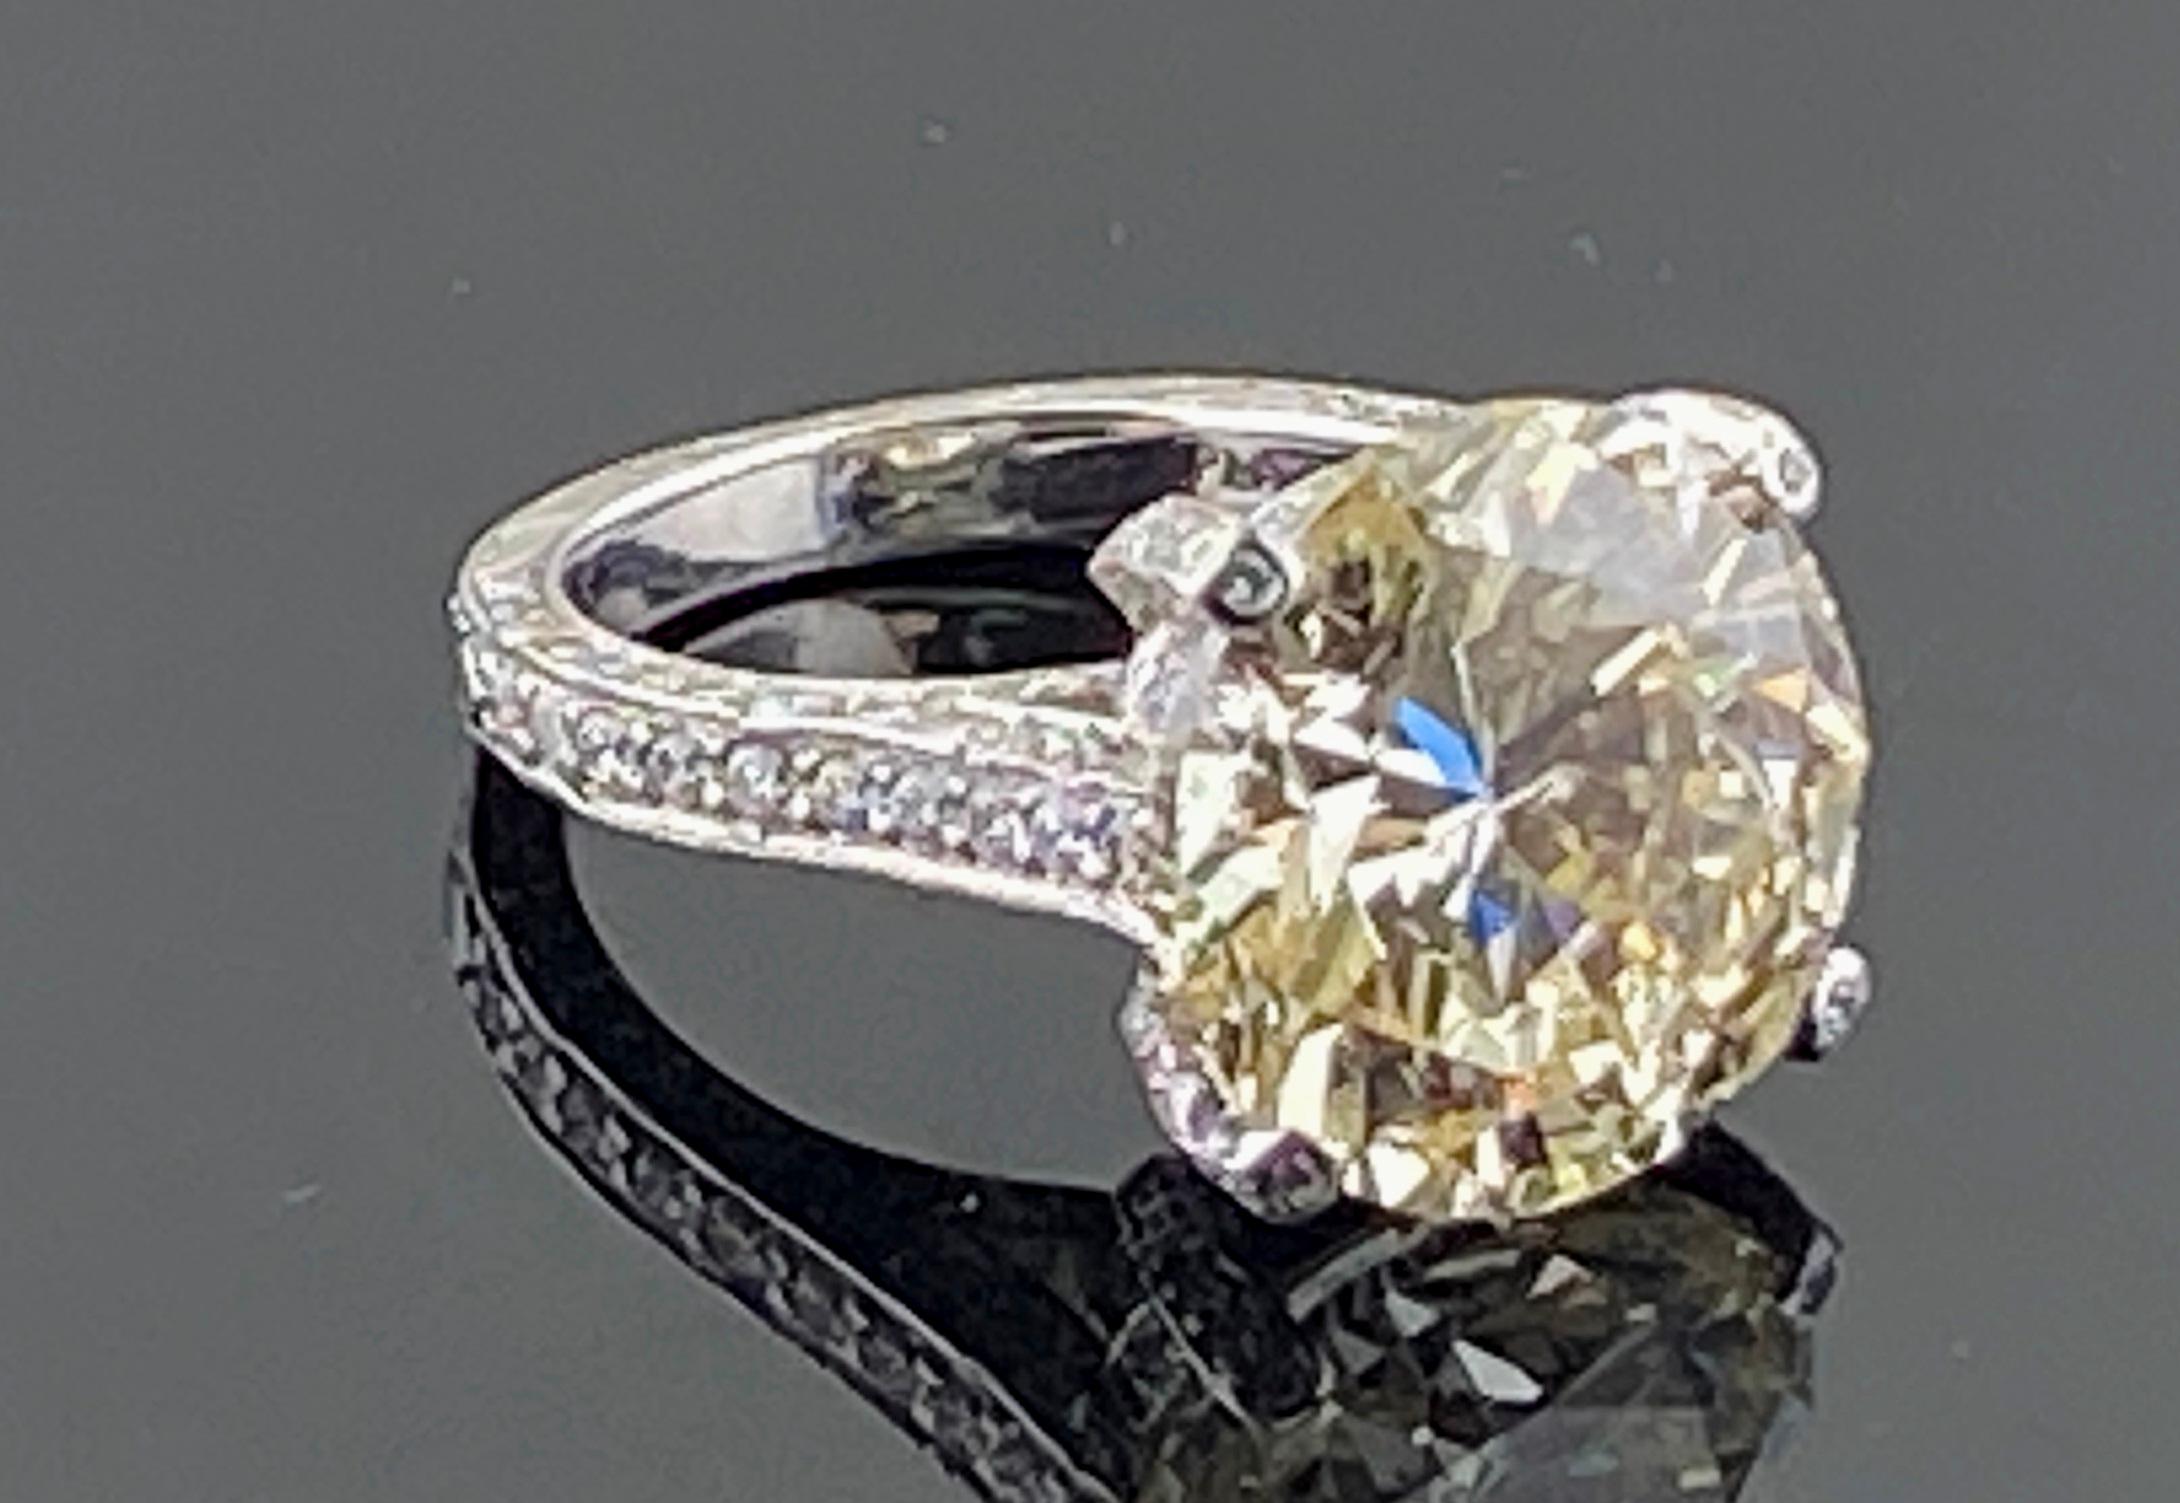 10.32 Carat Solitaire Diamond Ring in Platinum In Excellent Condition For Sale In Palm Desert, CA